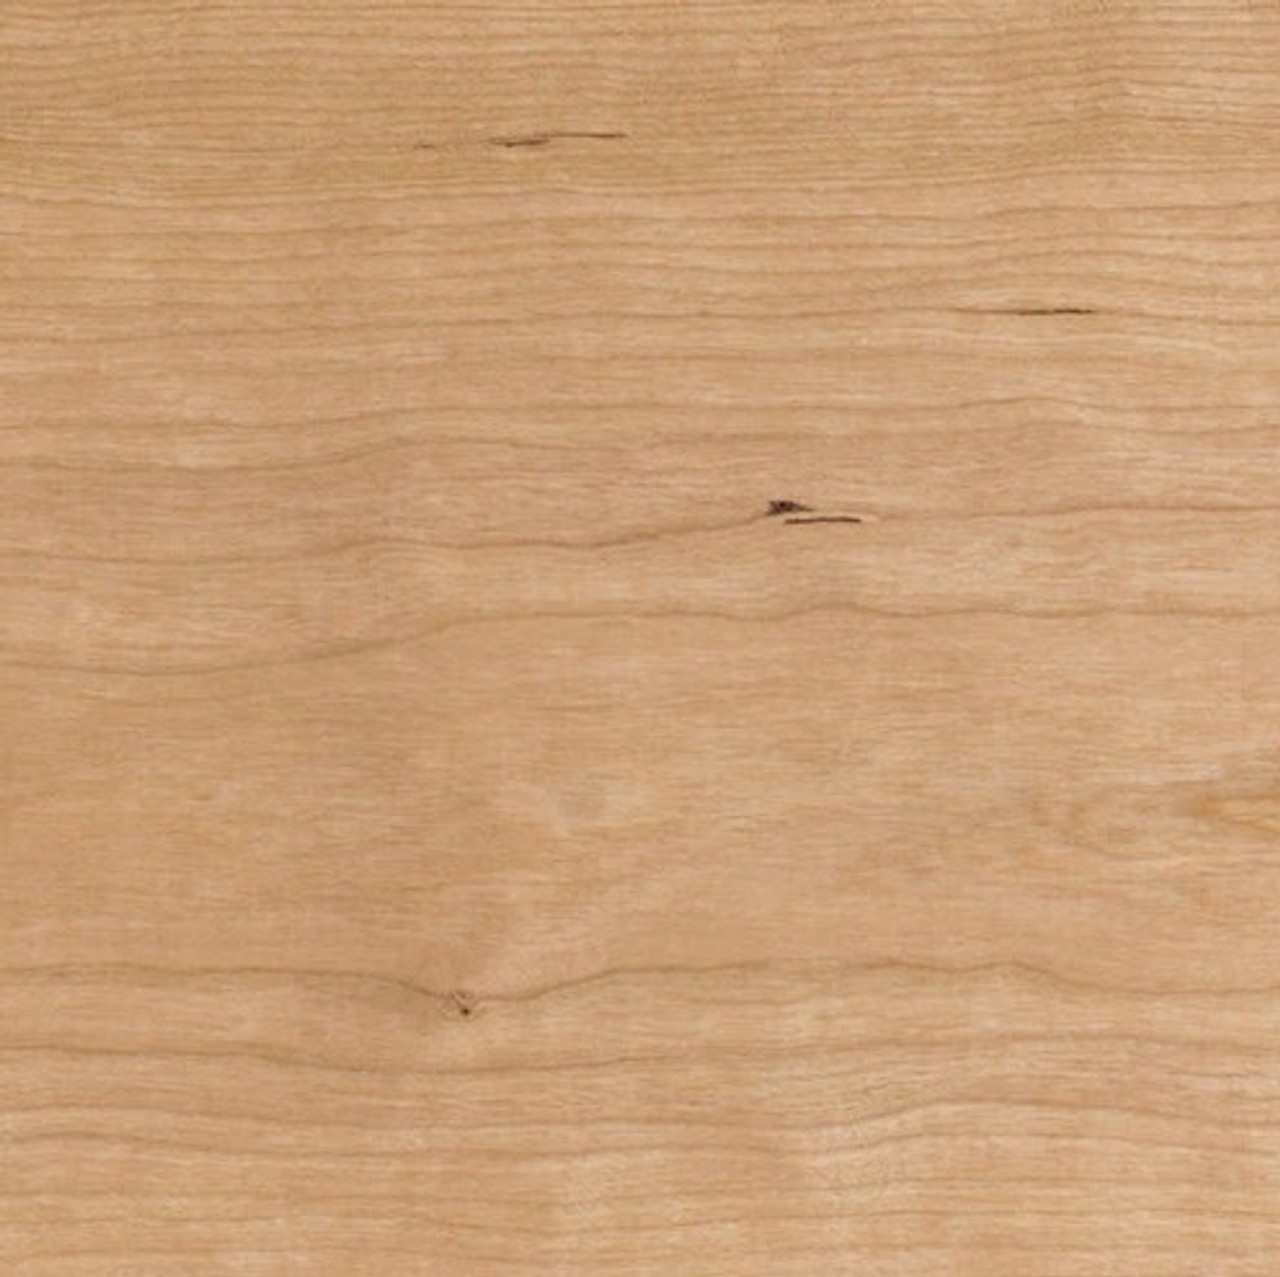 CHERRY PLYWOOD 1/4 GOOD 1 SIDE 48" X 48"  (cutting required)